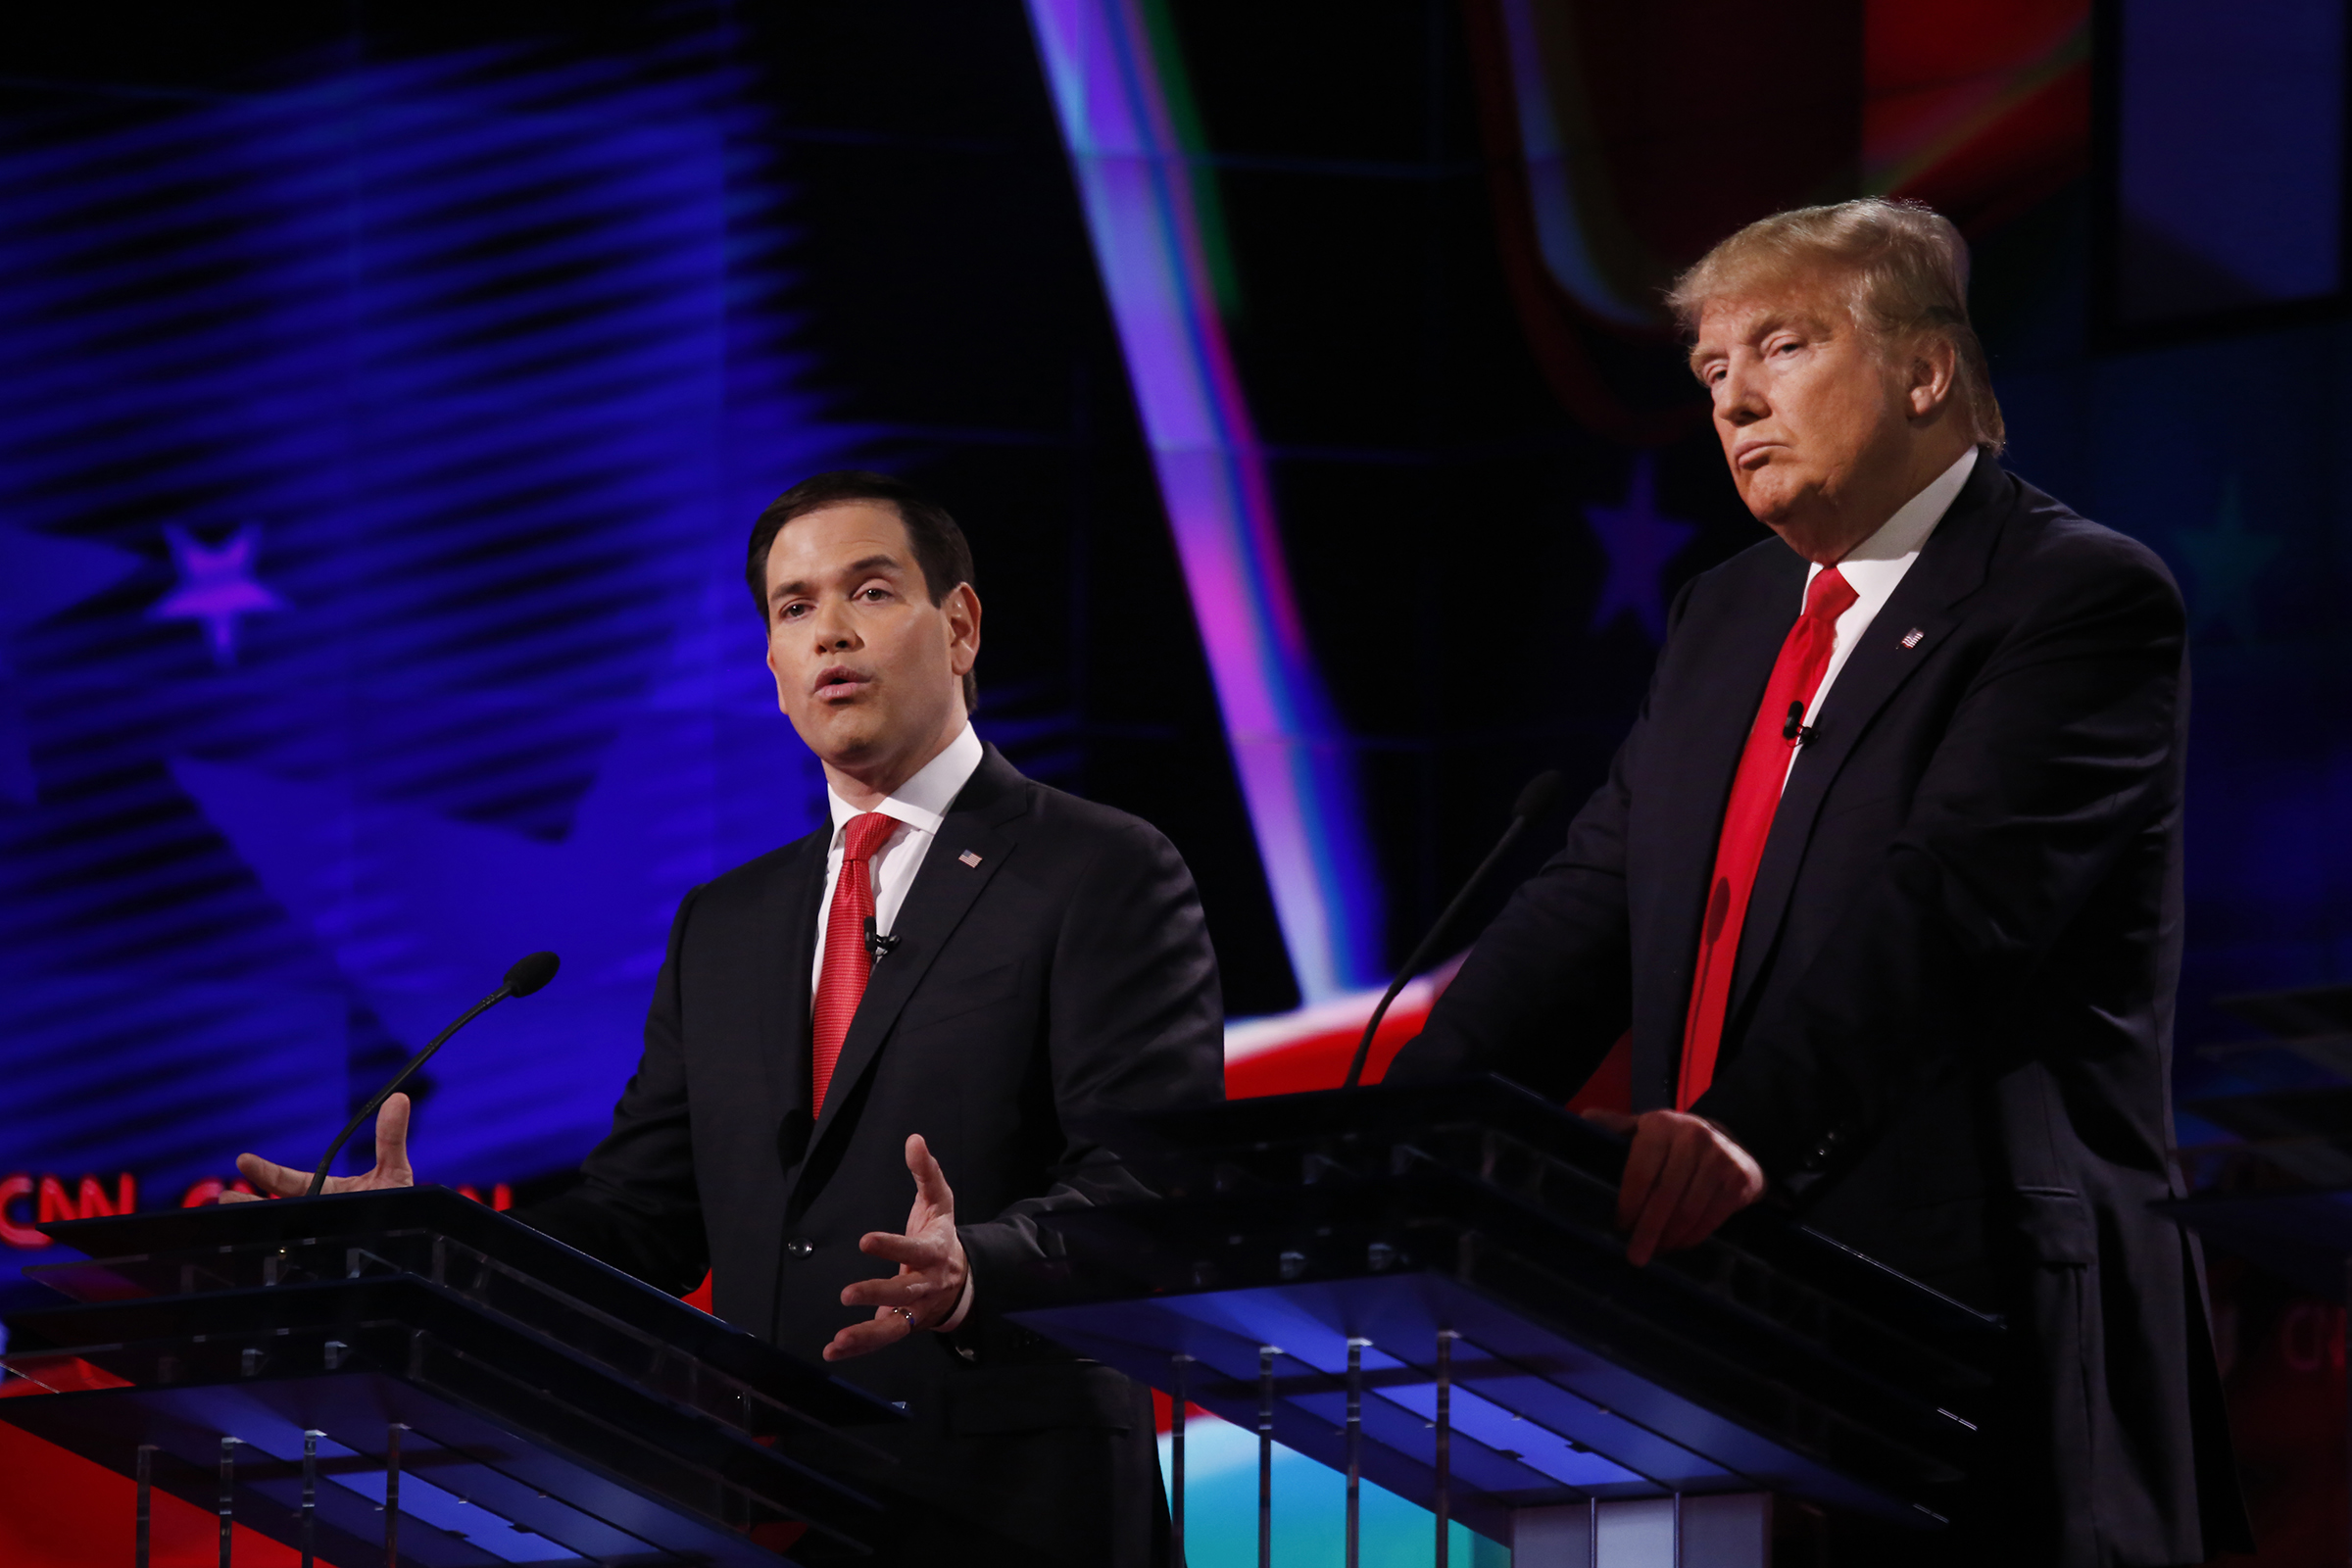 The four remaining Republican primary candidates Marco Rubio and Donald Trump debate at the University of Miami on March 10, 2016. (Carolyn Cole—LA Times via Getty Images)